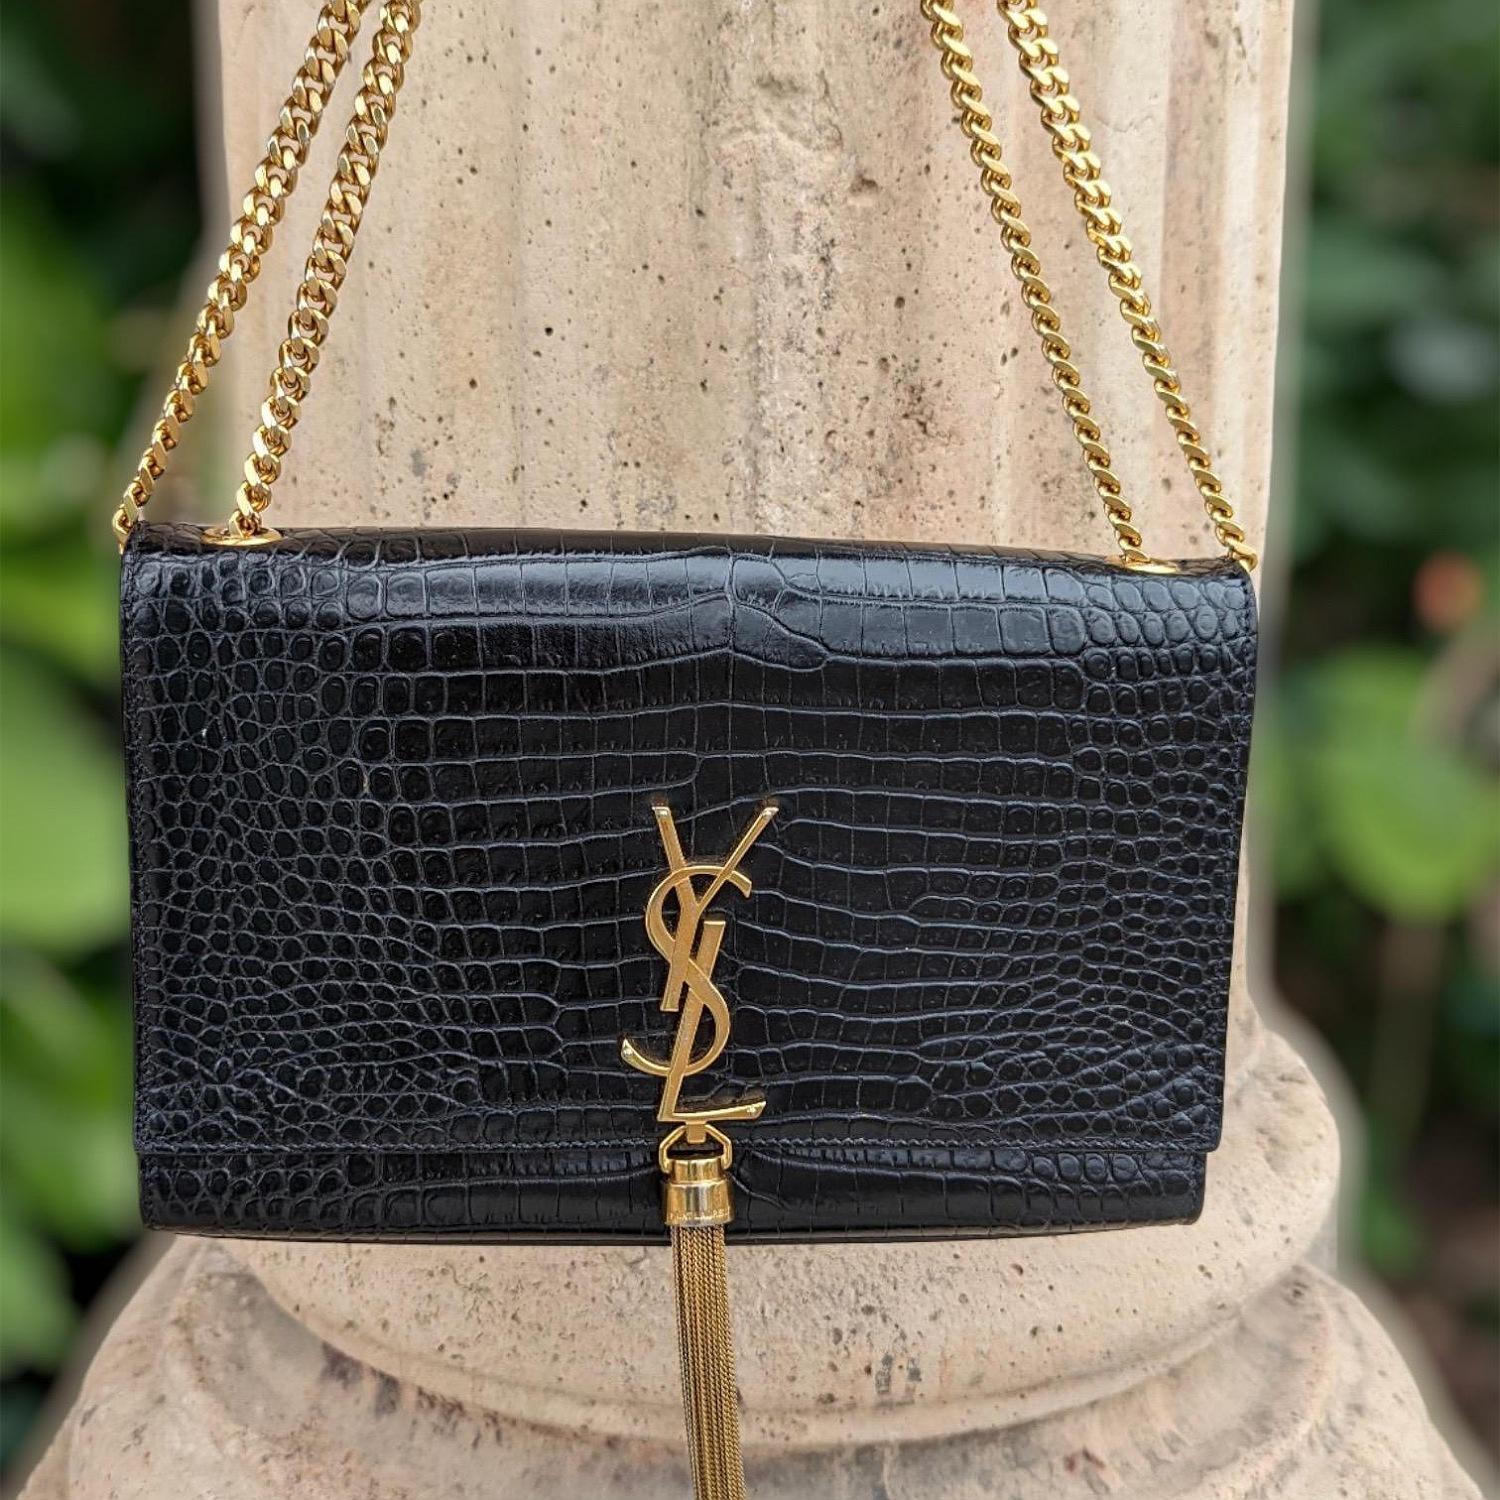 From the 2017 Collection by Anthony Vaccarello; Saint Laurent Kate Tassel Shoulder Bag. Crafted from croc-embossed leather in black. The bag features a gold chain link shoulder strap, a detailed tassel flap that opens to a black interior with a